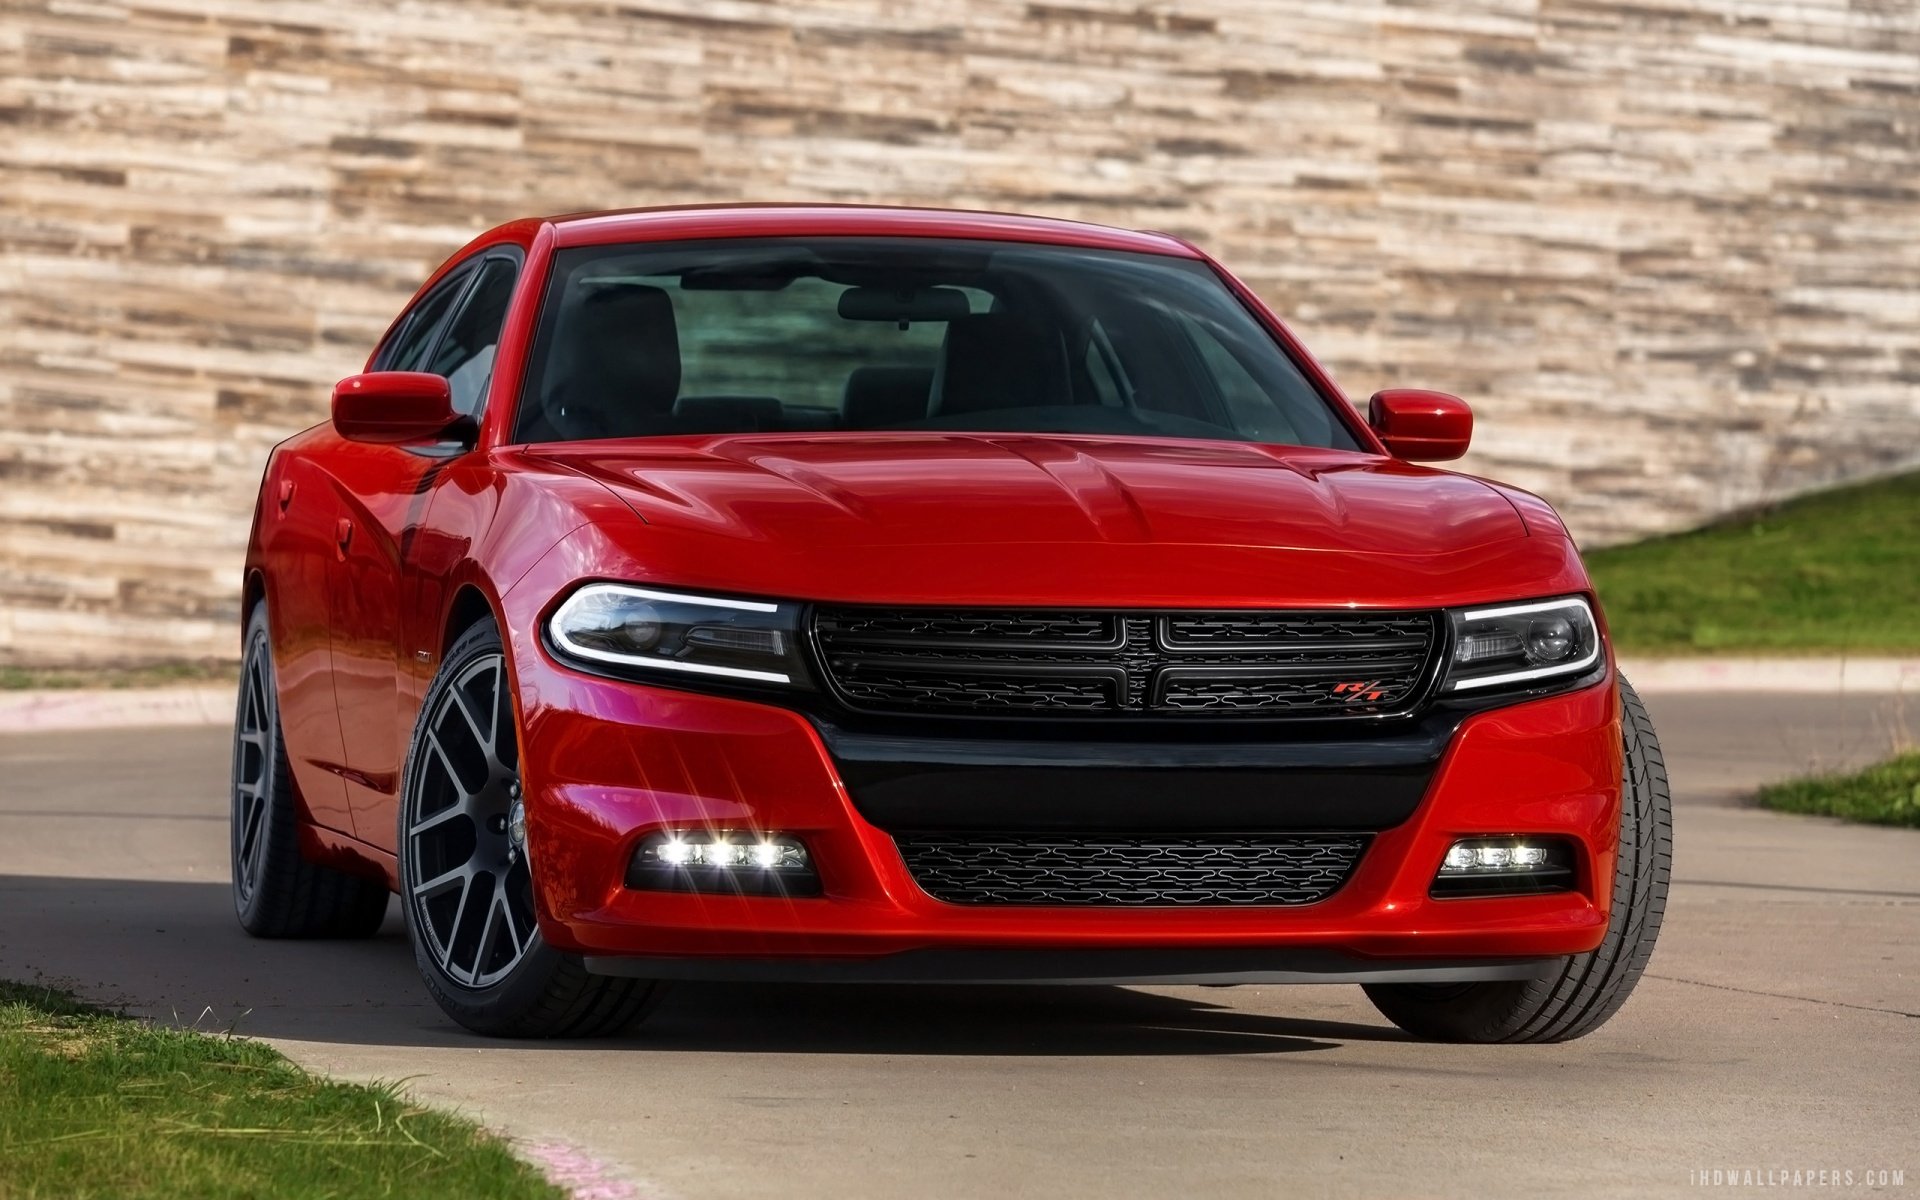 Dodge Charger 2015 HD Wallpaper   iHD Wallpapers